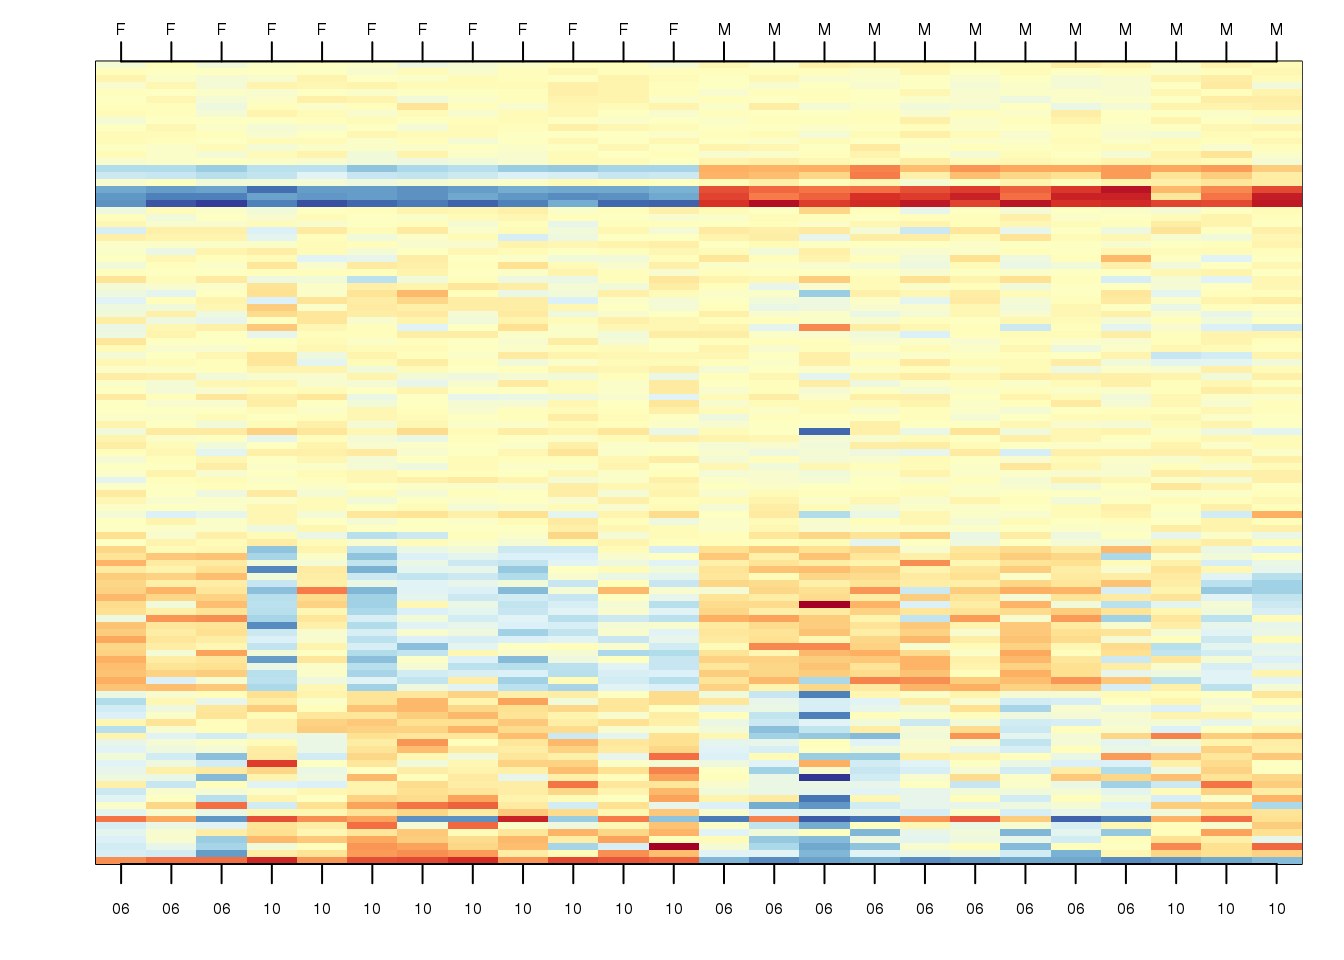 Image of gene expression data for genes selected to show difference in group as well as the batch effect, along with some randomly chosen genes.